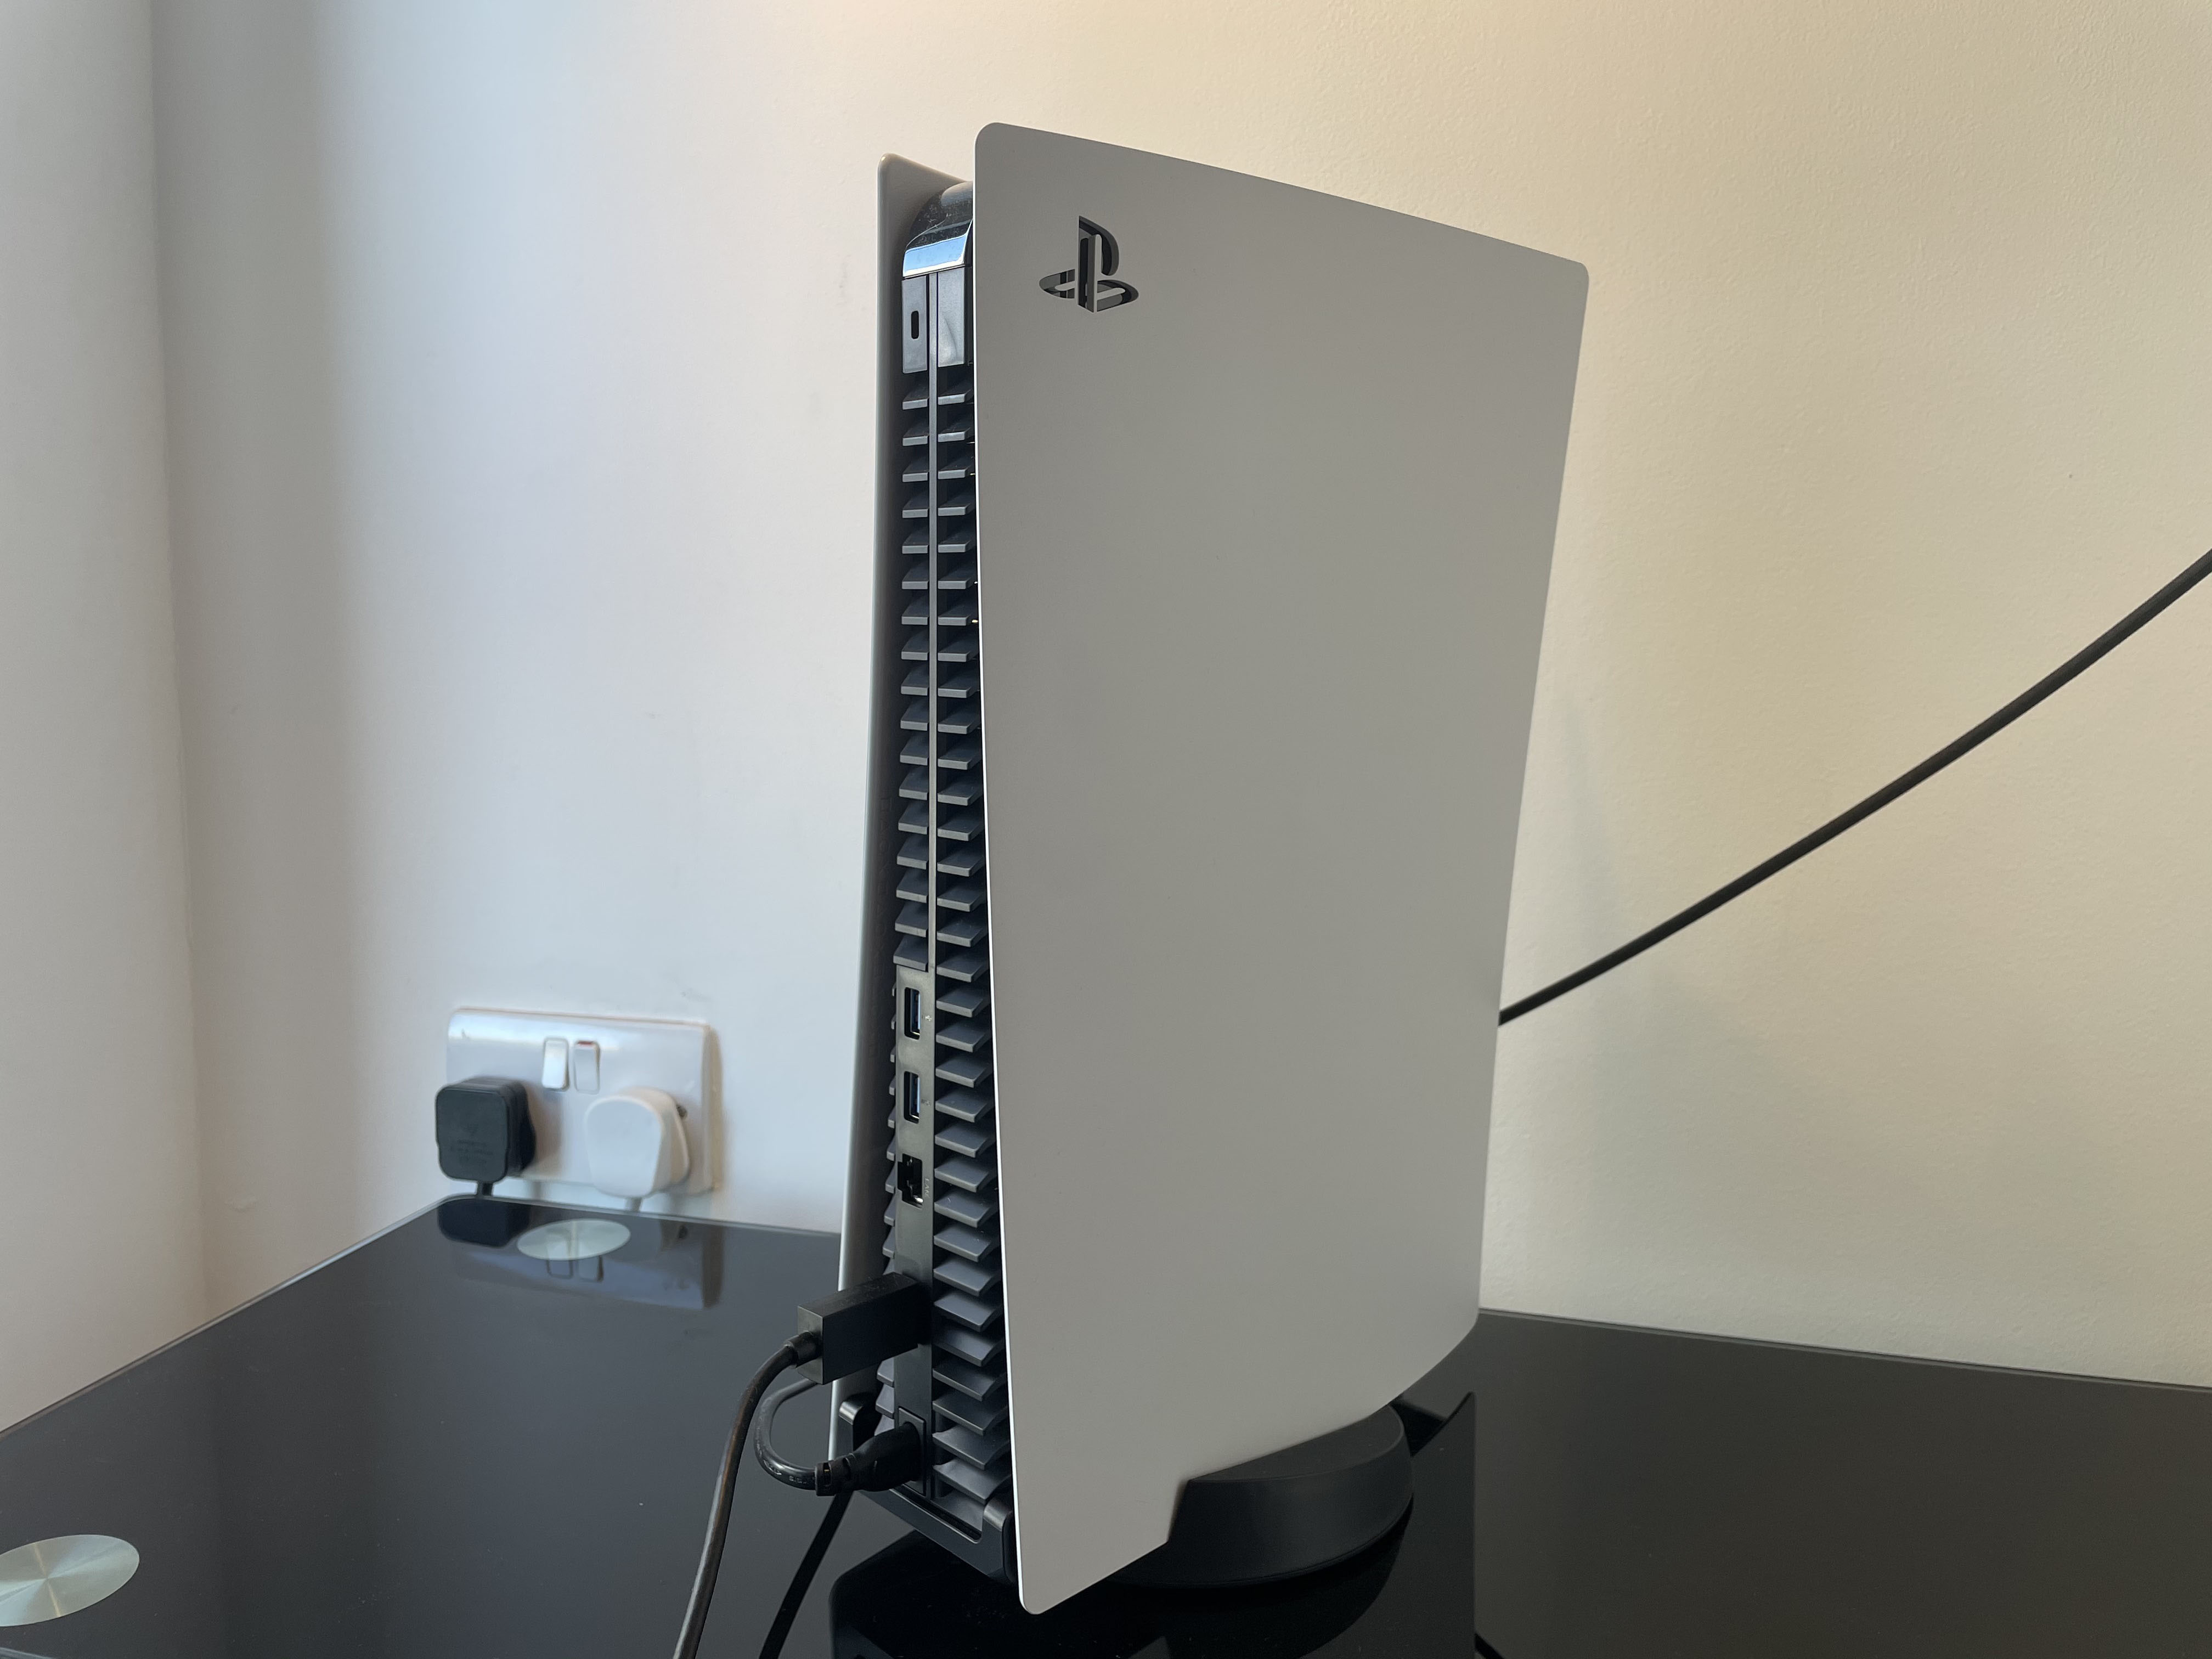 Sony PlayStation 5 review: still the generation king